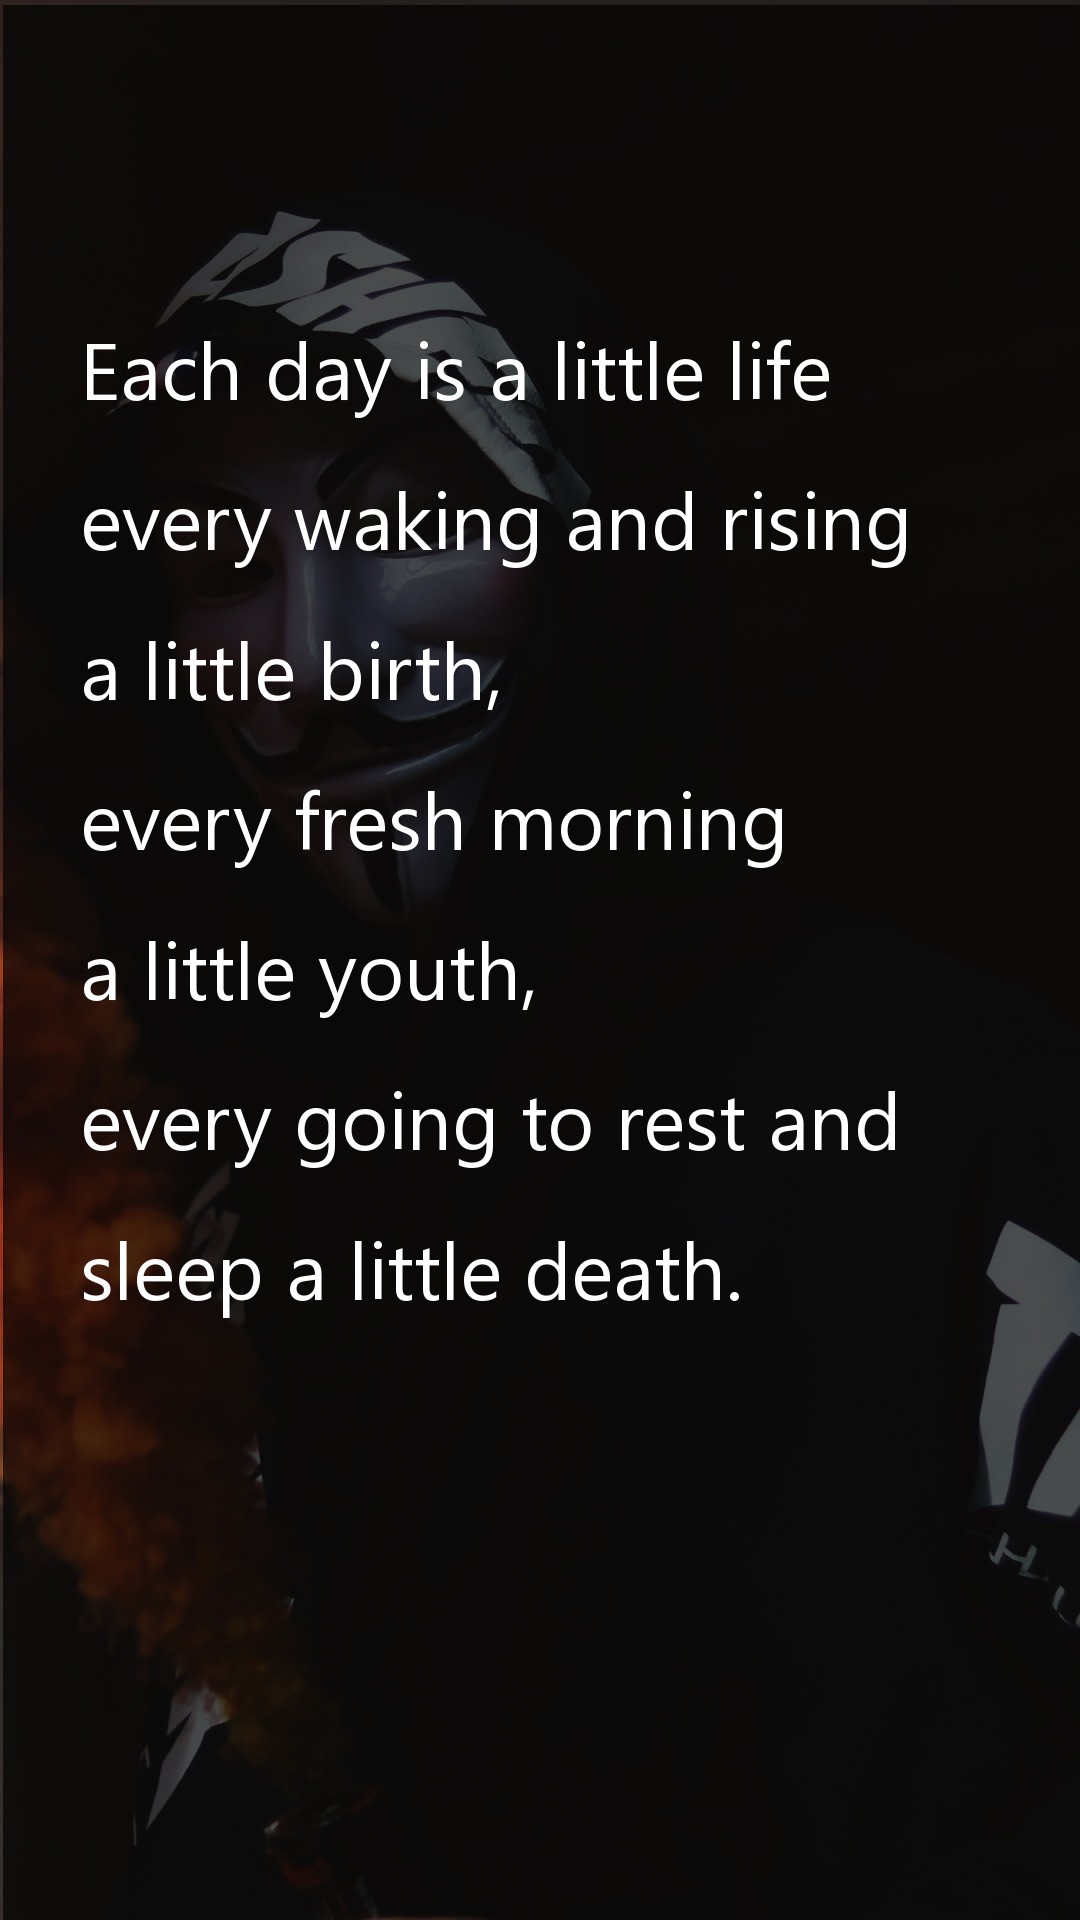 Each day is a little life Death Quotes at statush.com